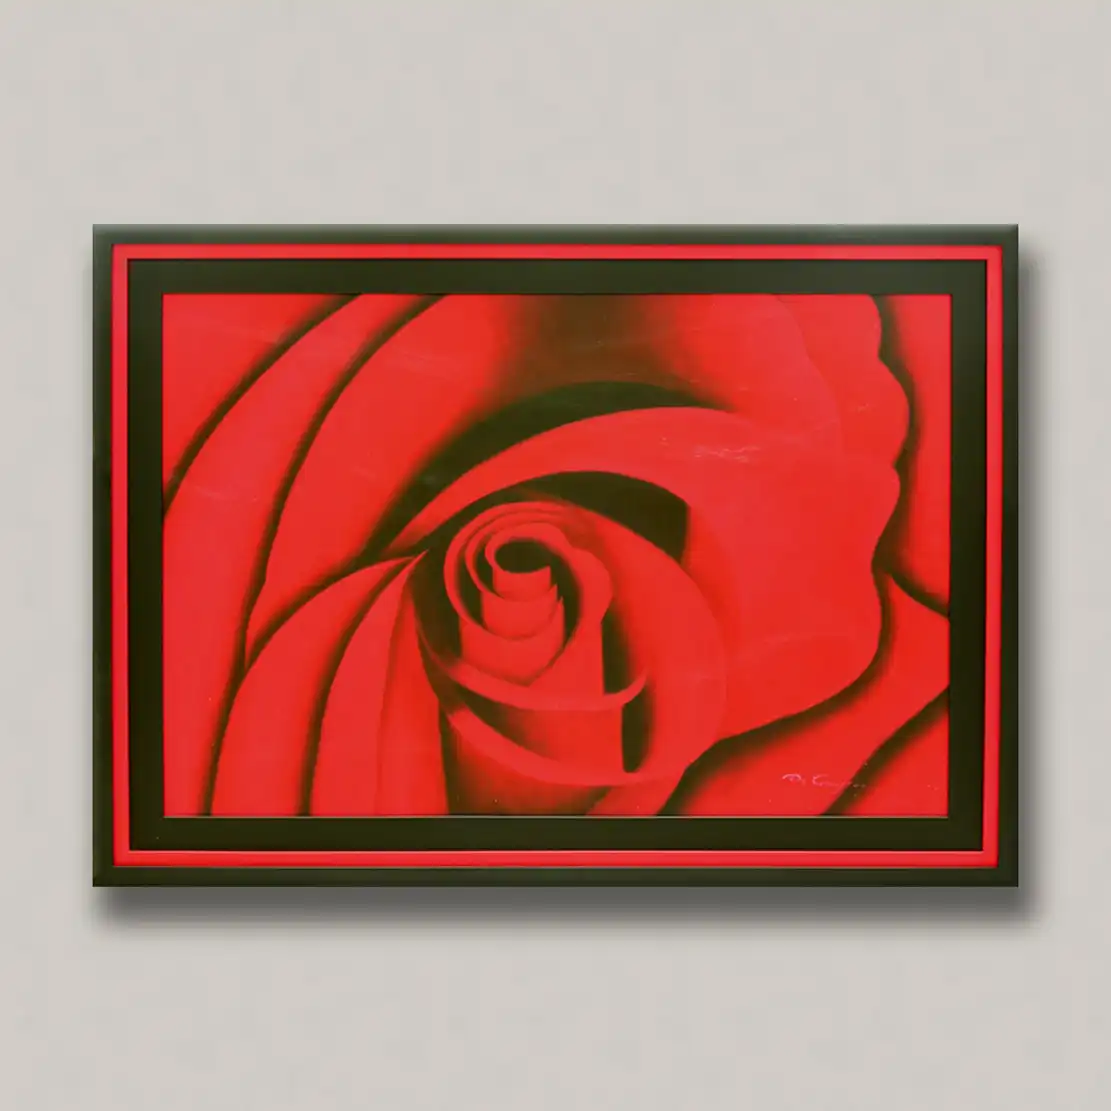 Pre Framed Wall Pictures Decor For sale RedRose